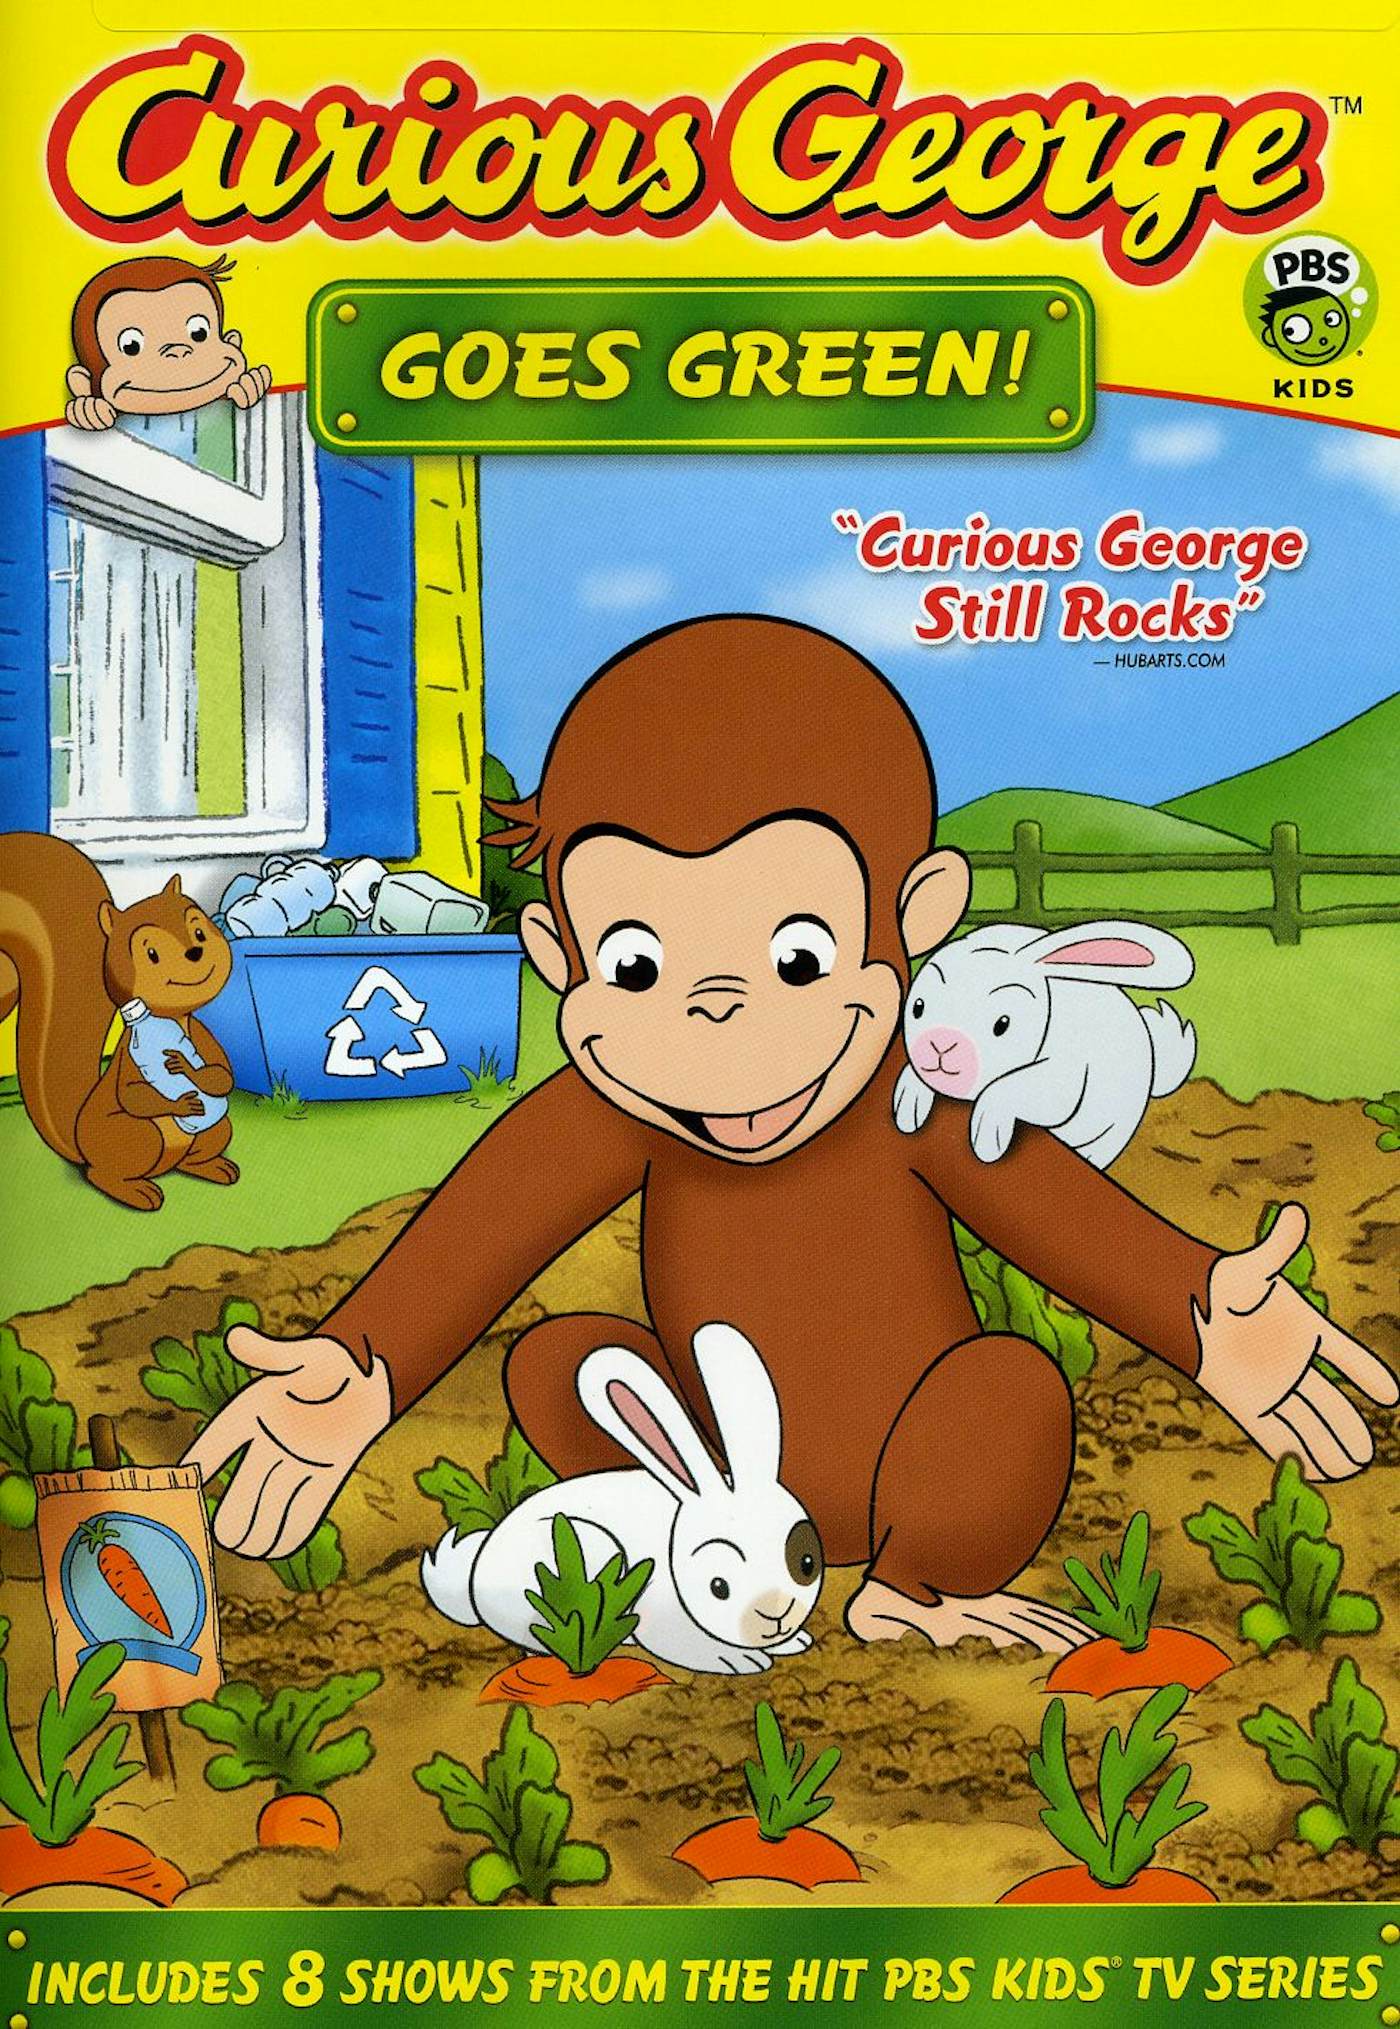 Curious George goes Back to the Jungle on AETN